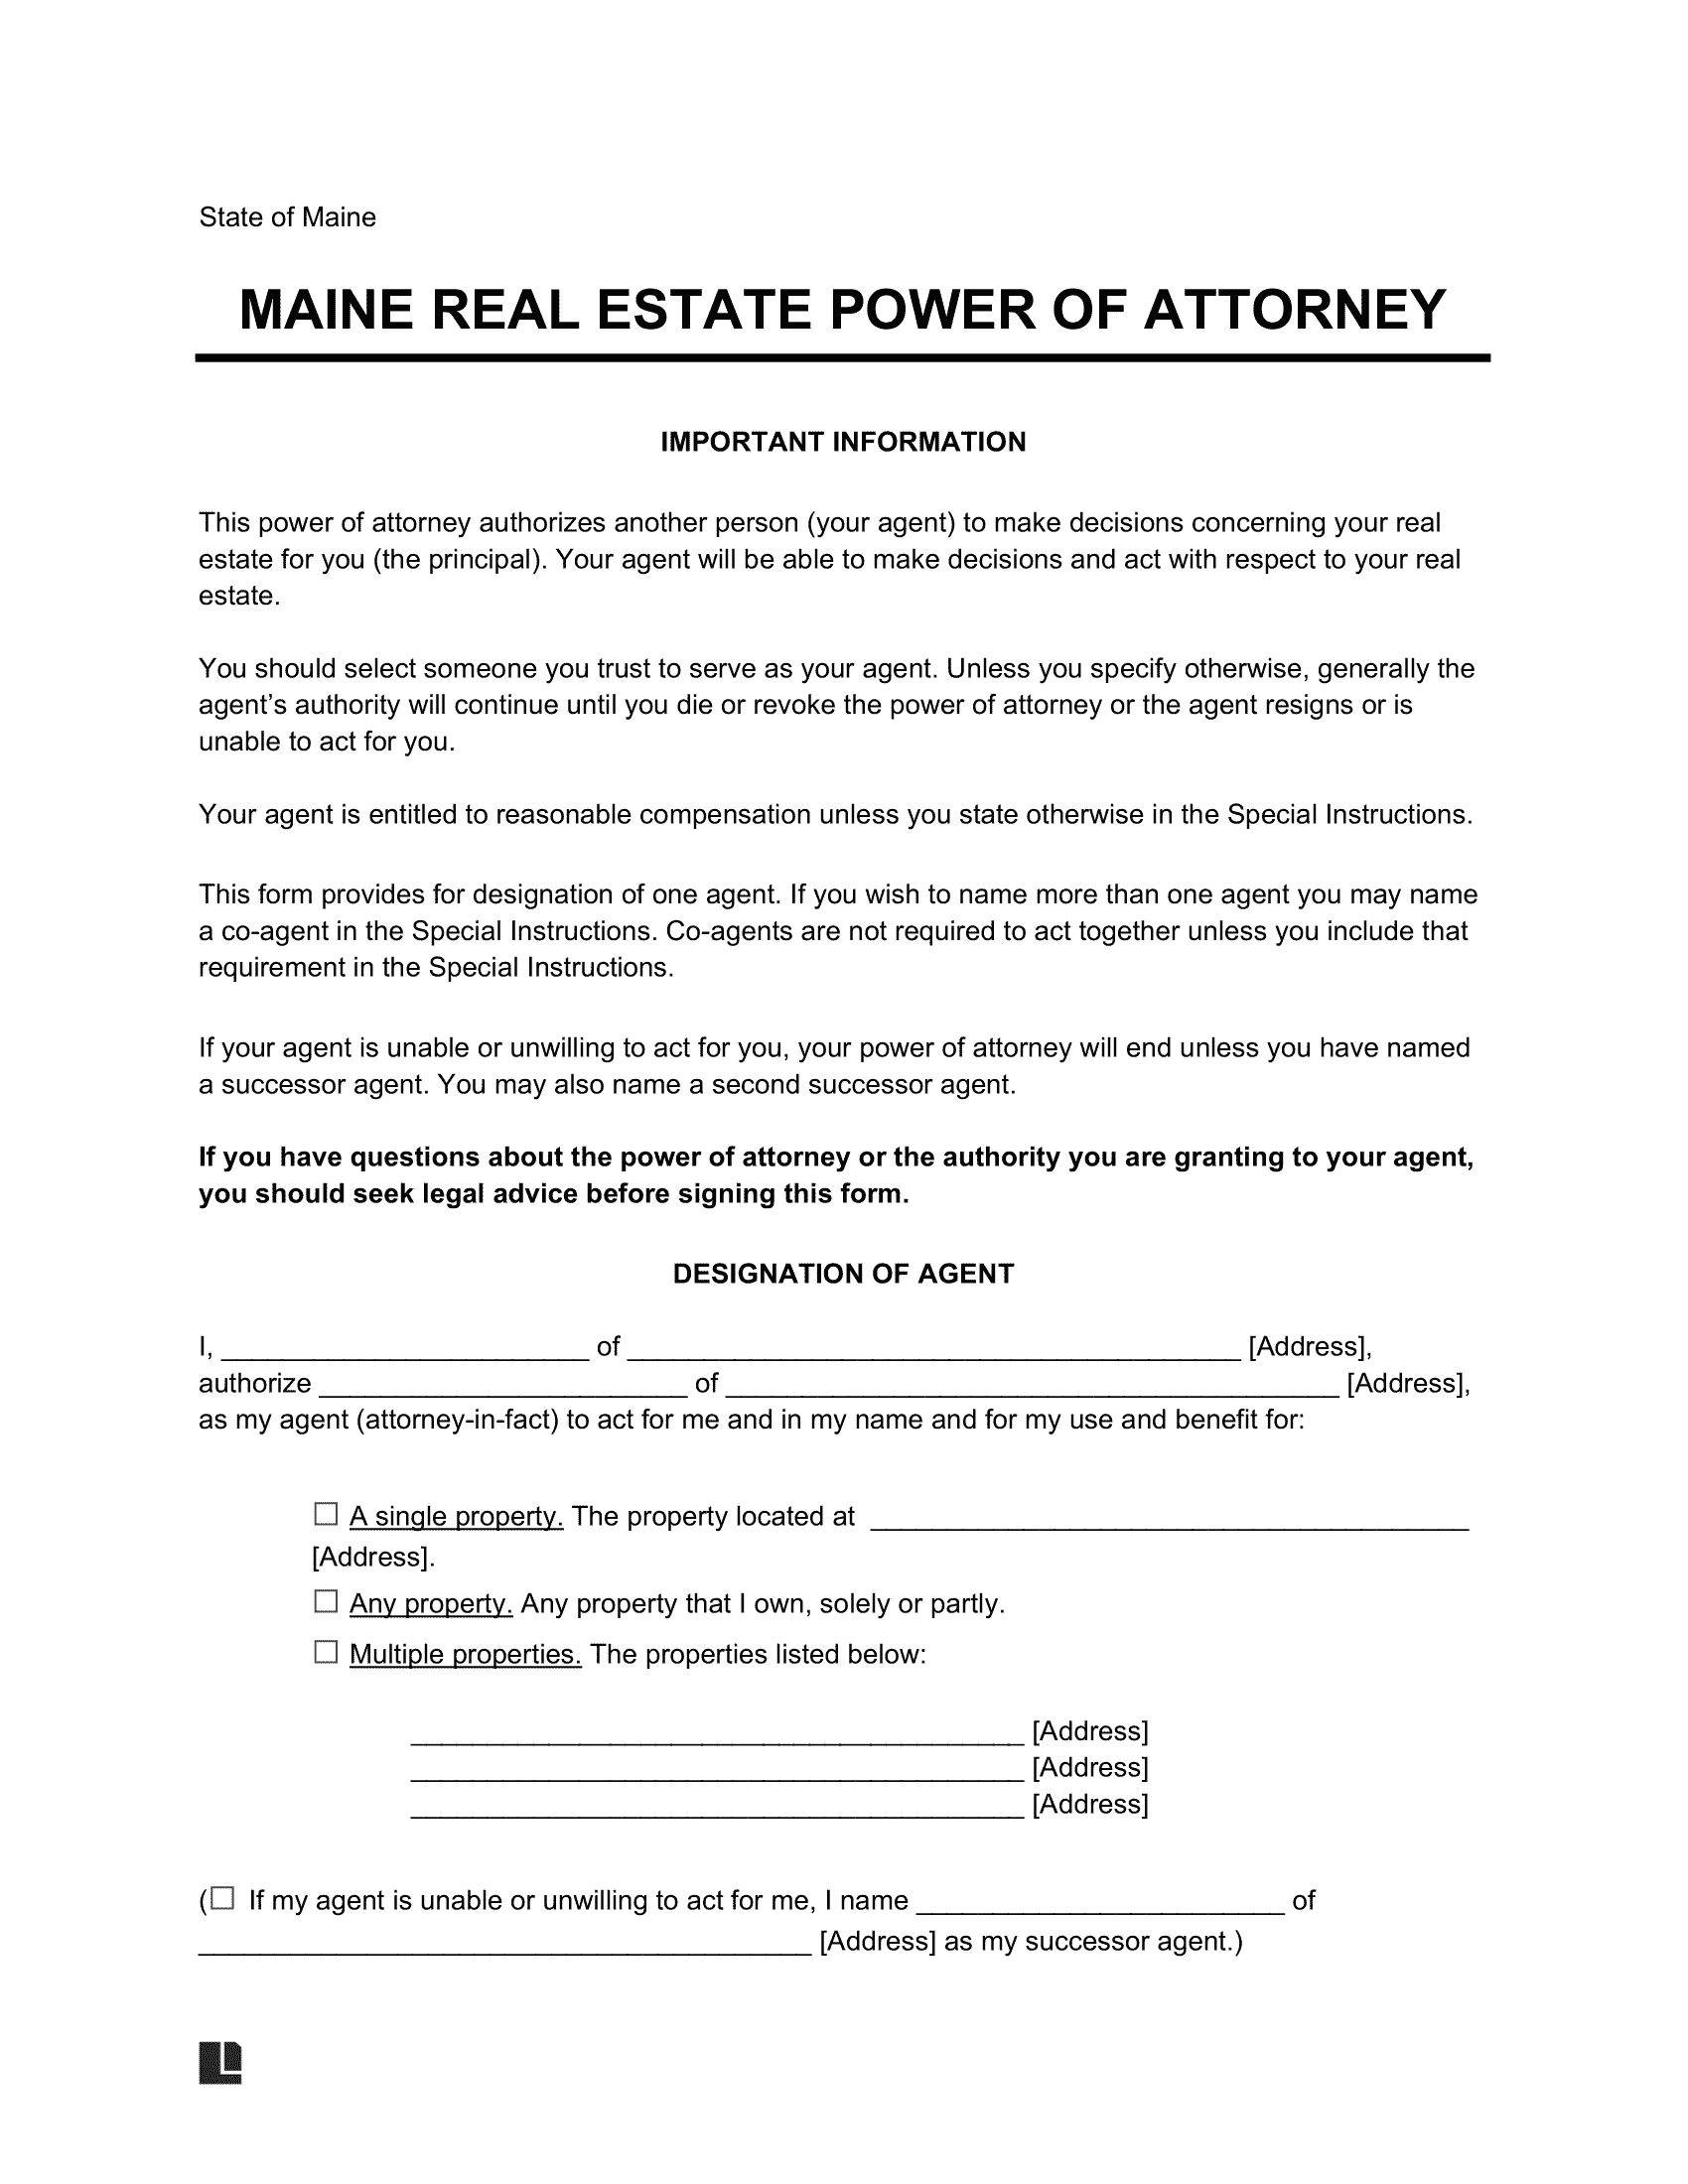 Maine Real Estate Power of Attorney Form